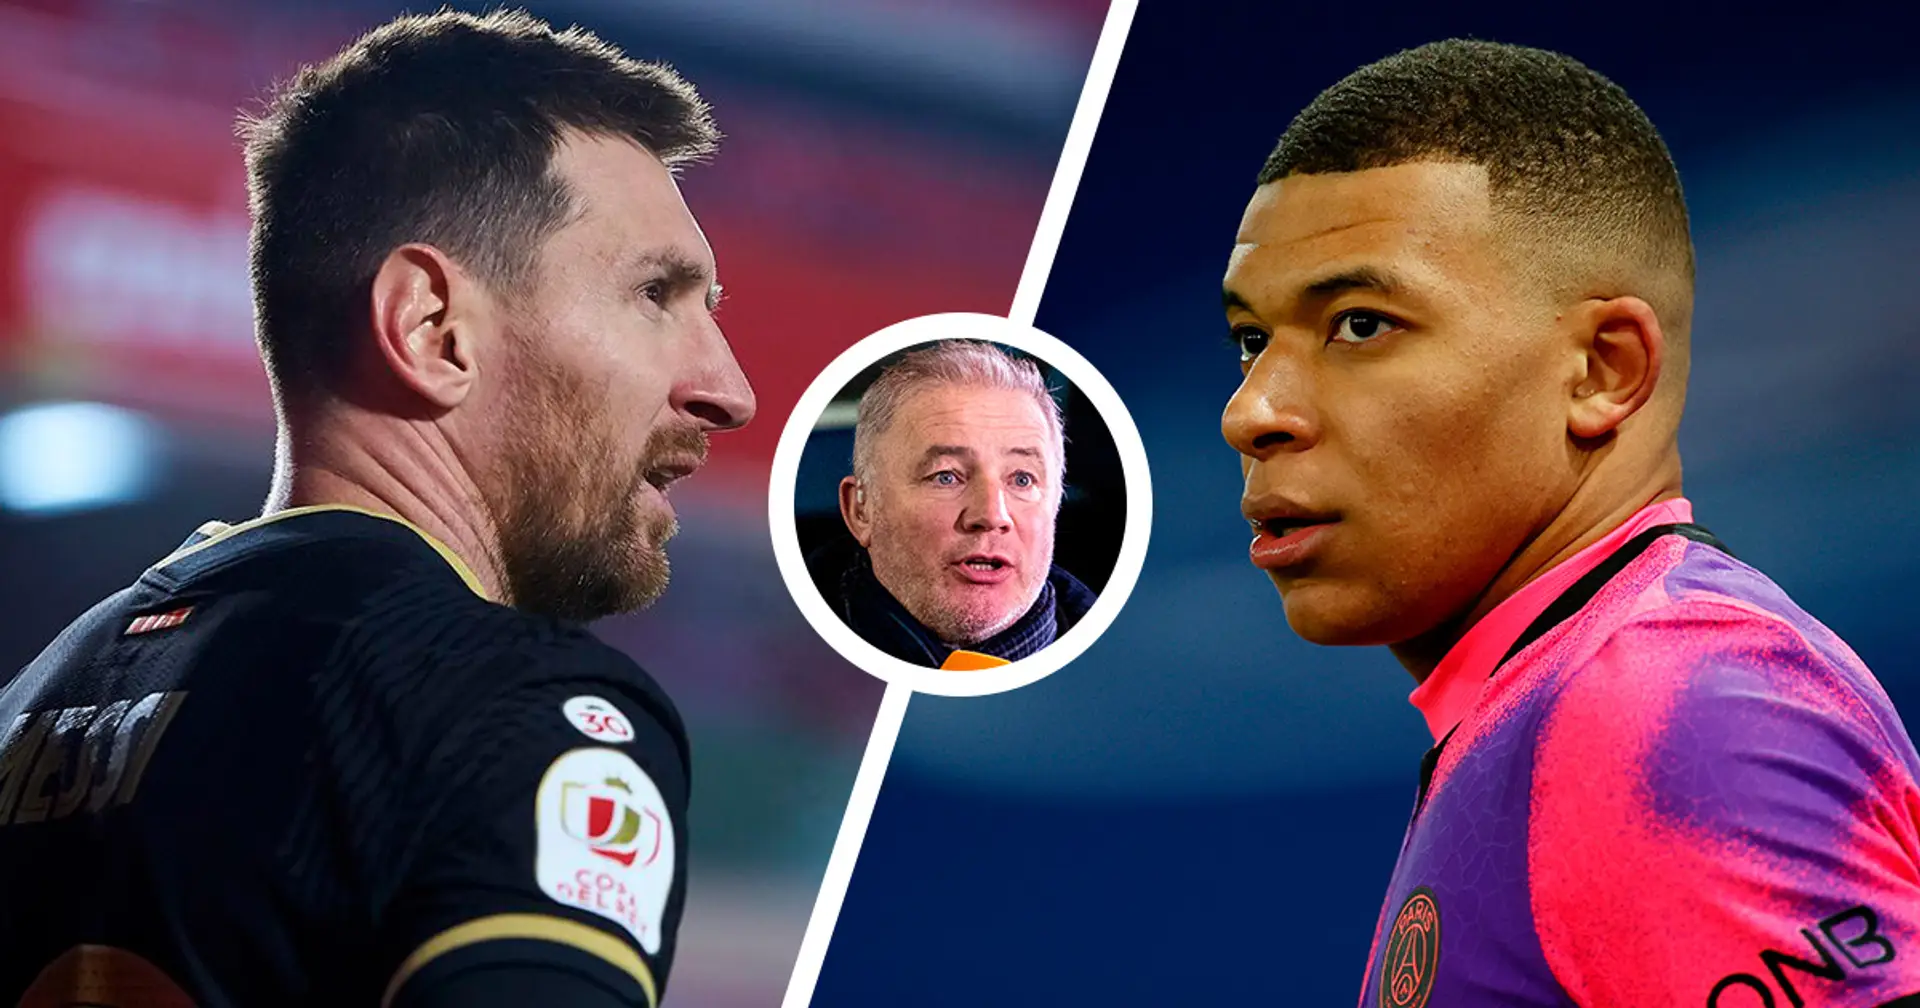 'I don't think Mbappe can do things with a ball Messi can do': Scotland legend Ally McCoist